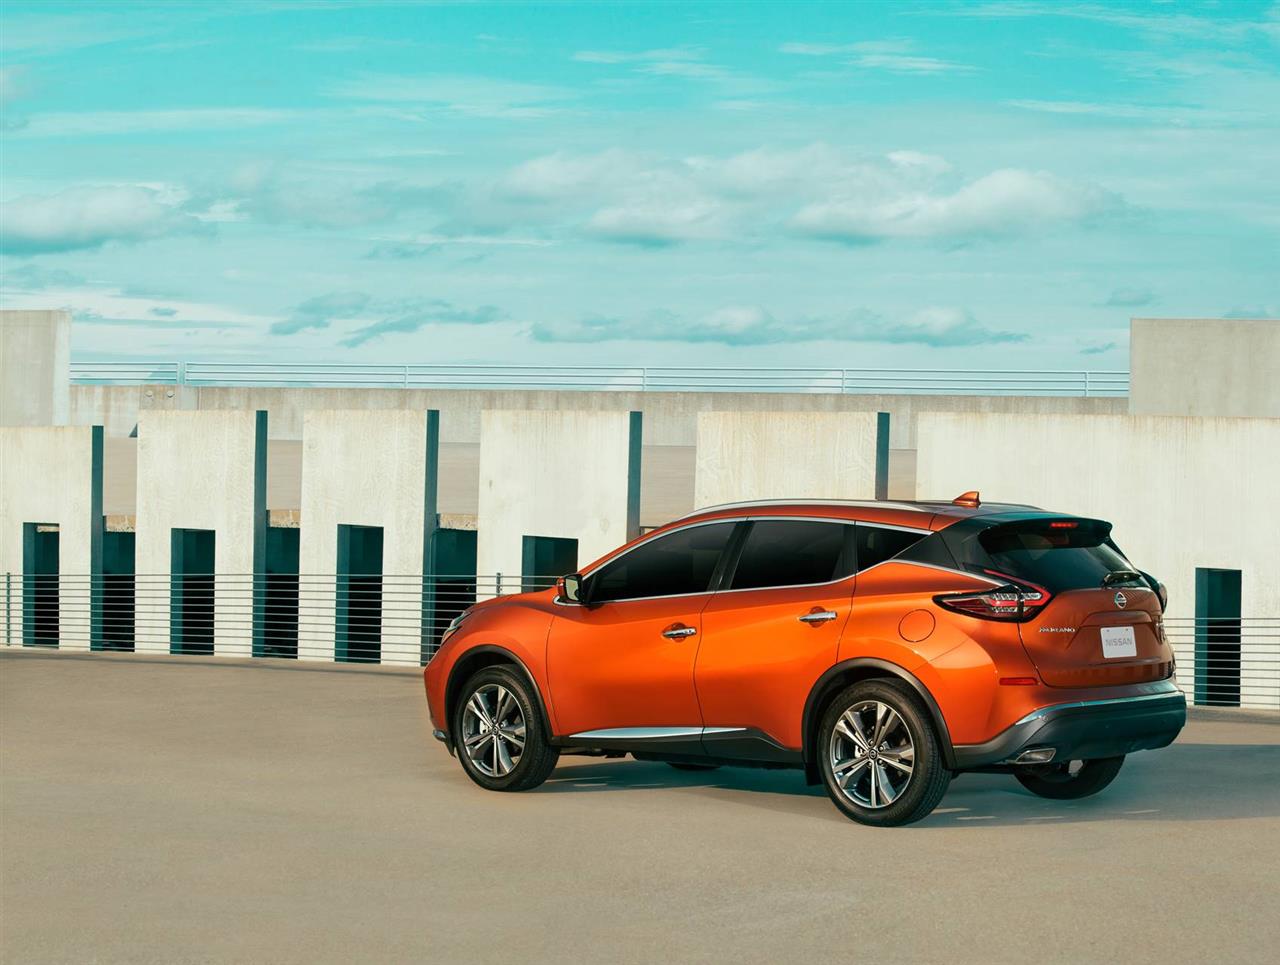 2021 Nissan Murano Features, Specs and Pricing 4